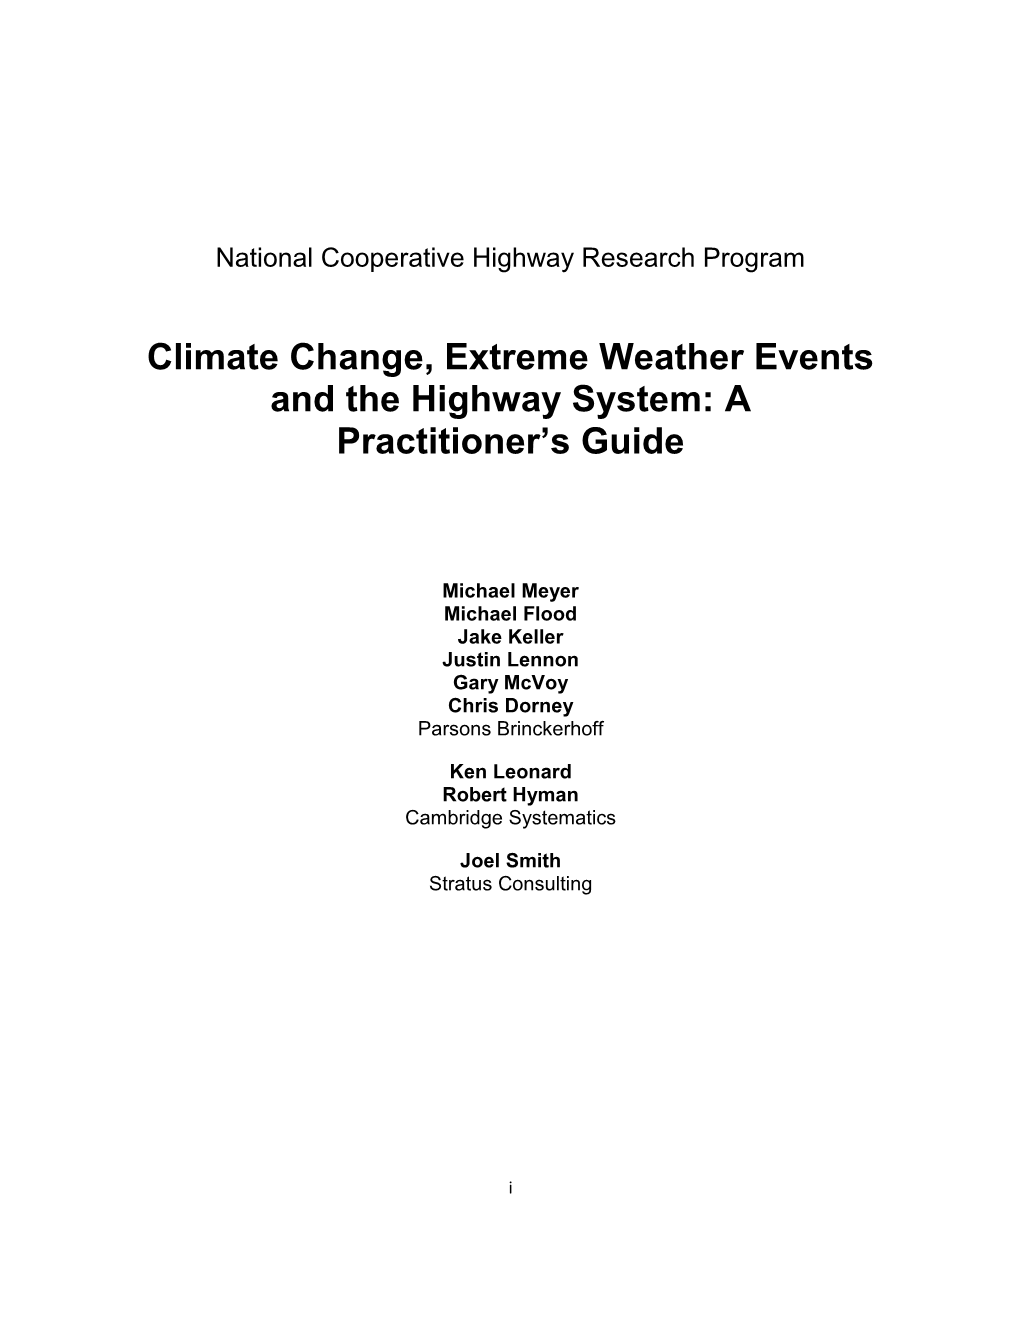 Climate Change, Extreme Weather Events and the Highway System: a Practitioner’S Guide